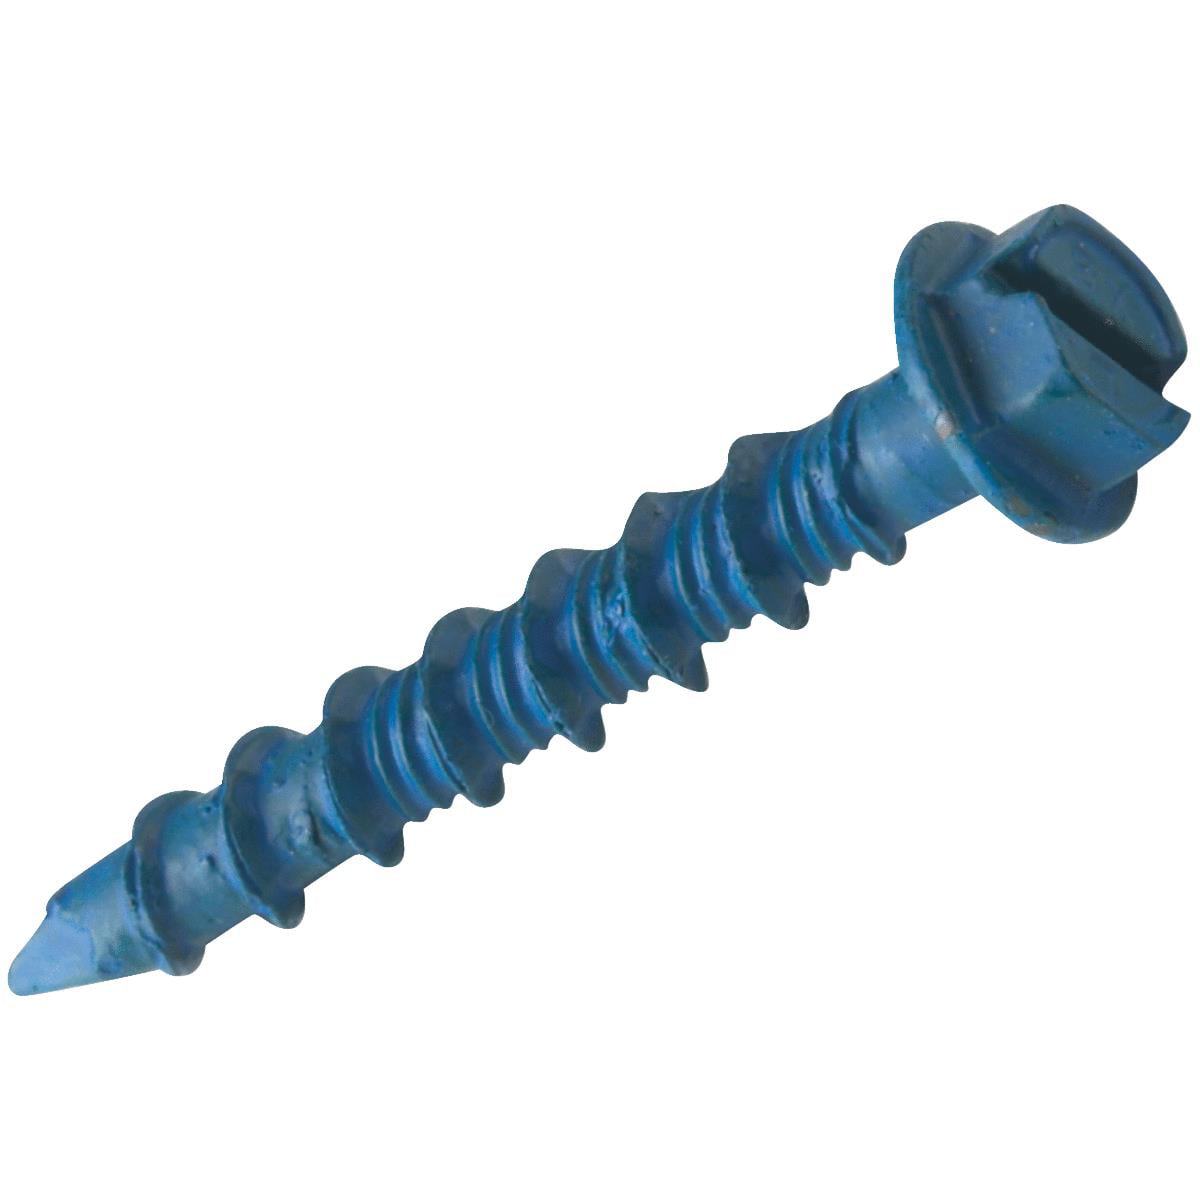 50 *LGR QTY IN OUR STORE* 1/4"x1-1/4" Concrete/Masonry Screw Anchors Tapcon 